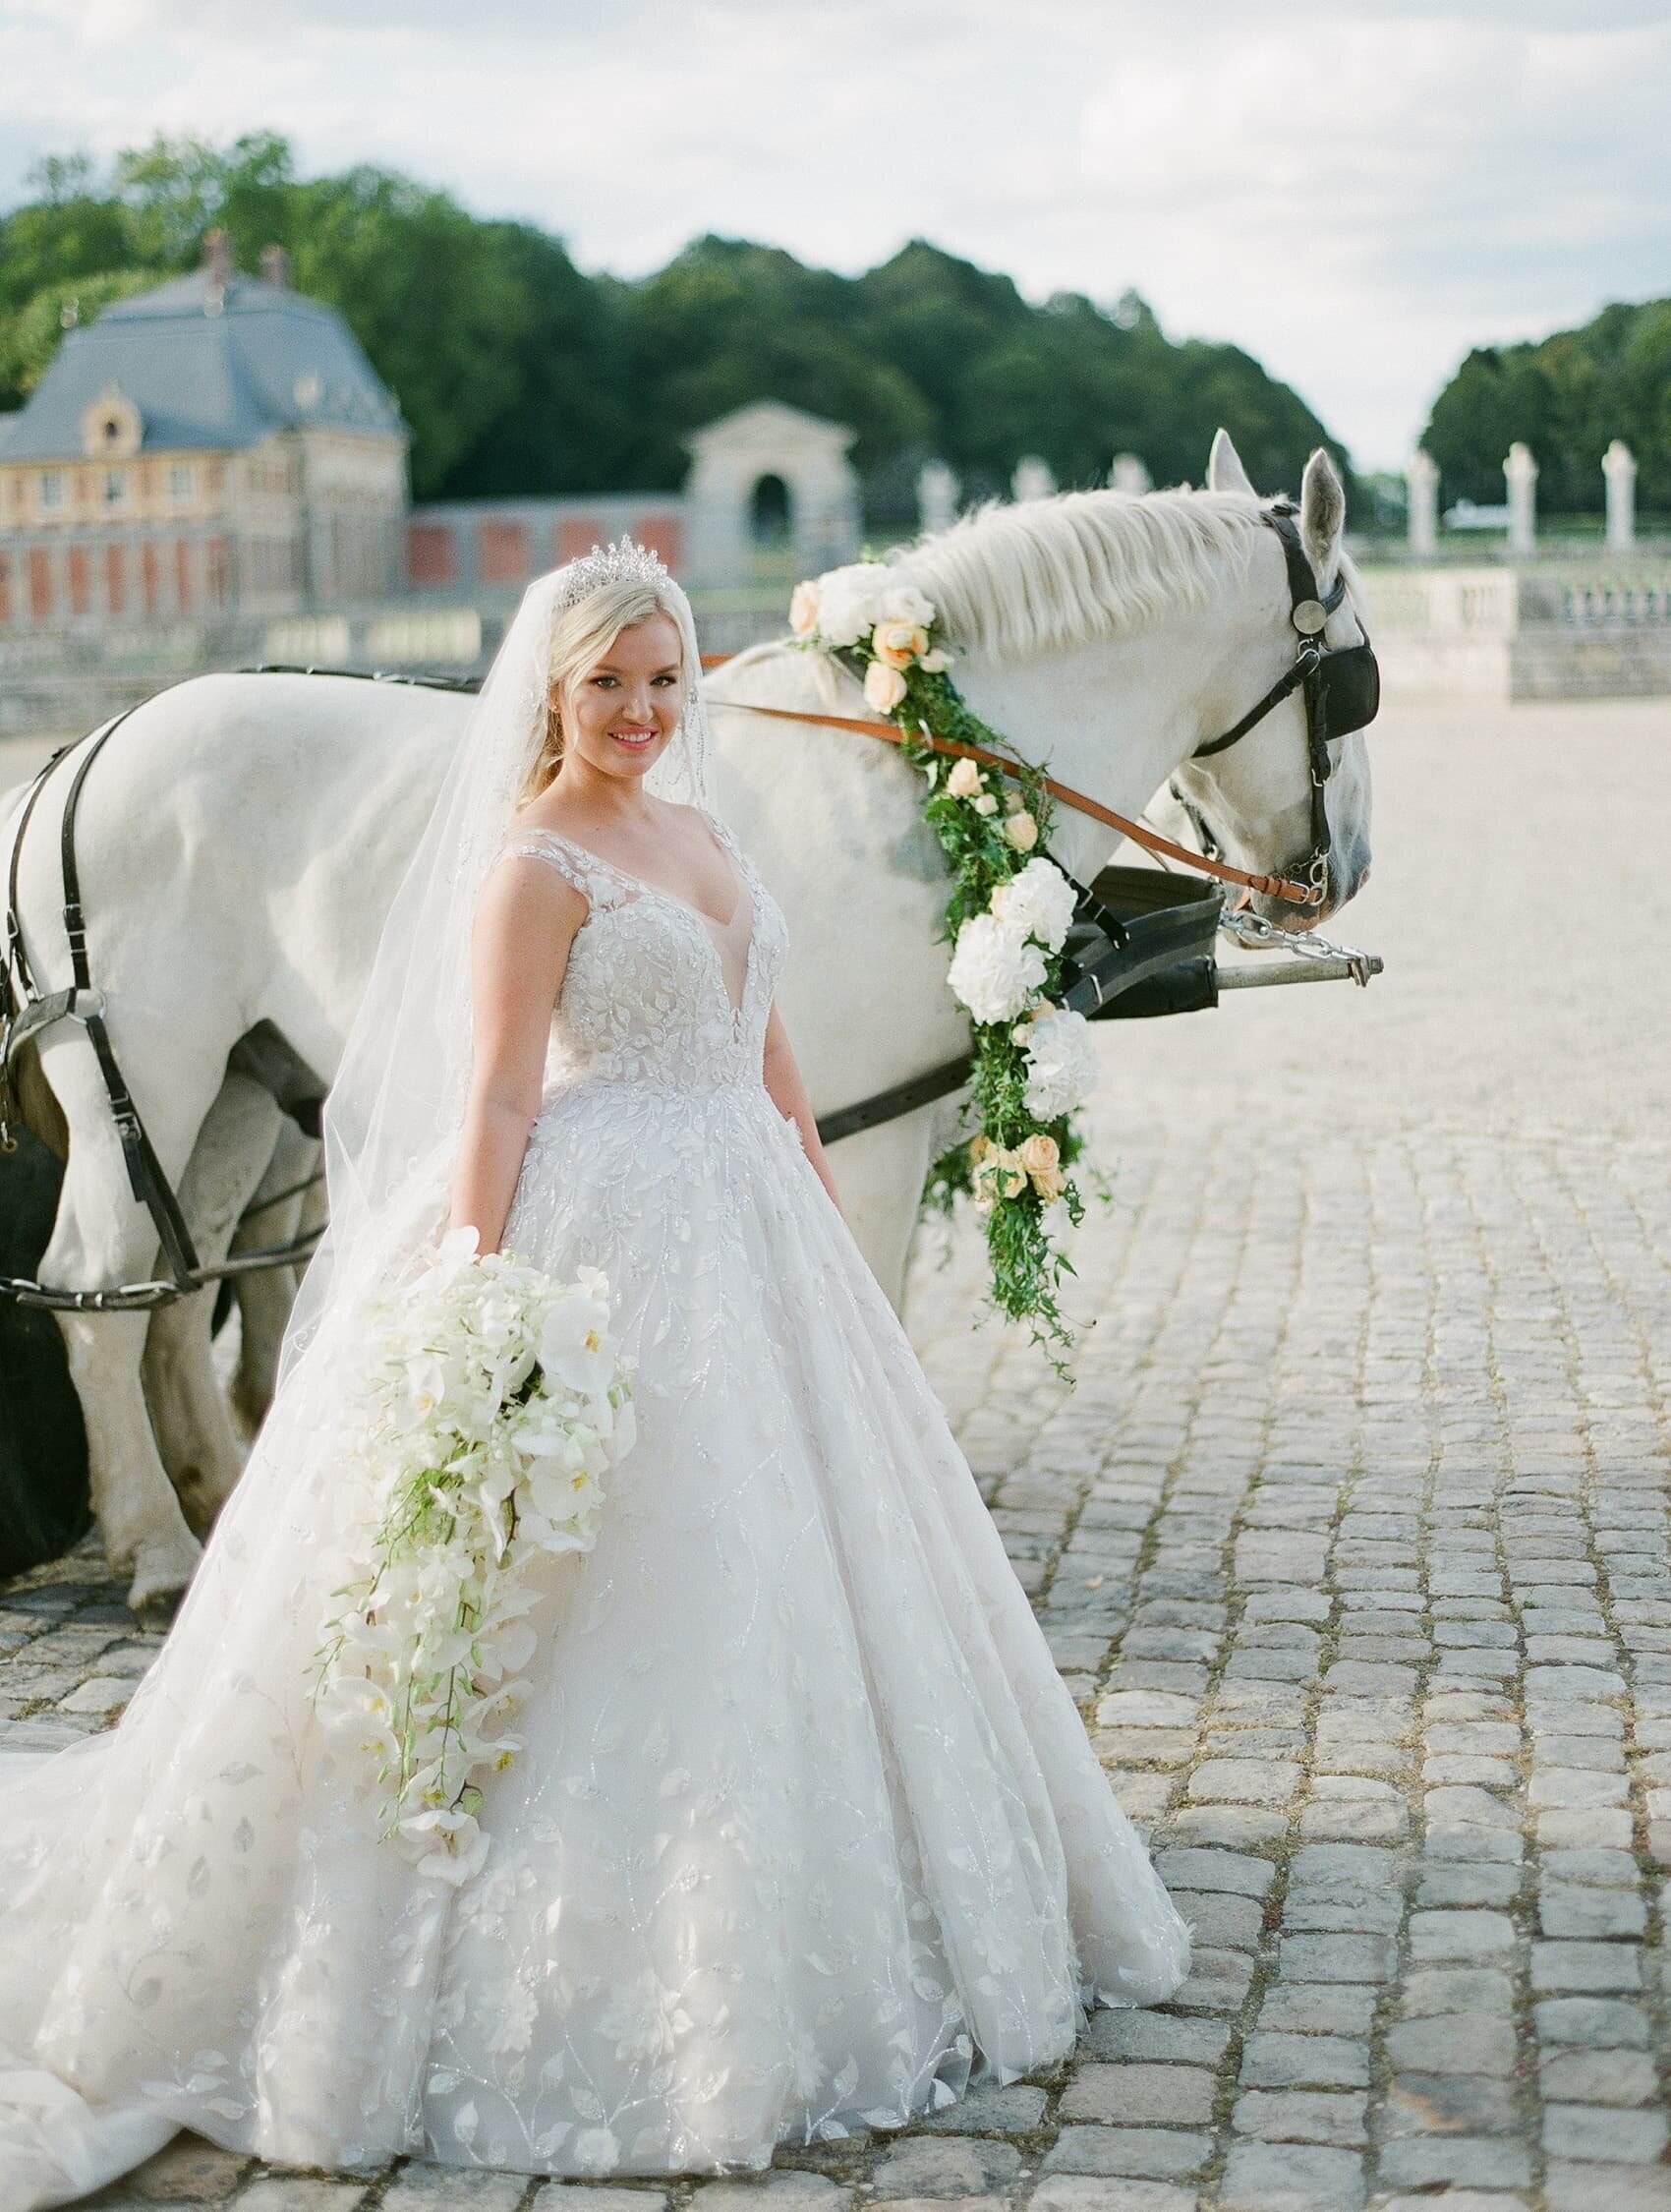 Bride in wedding gown standing next to white horse